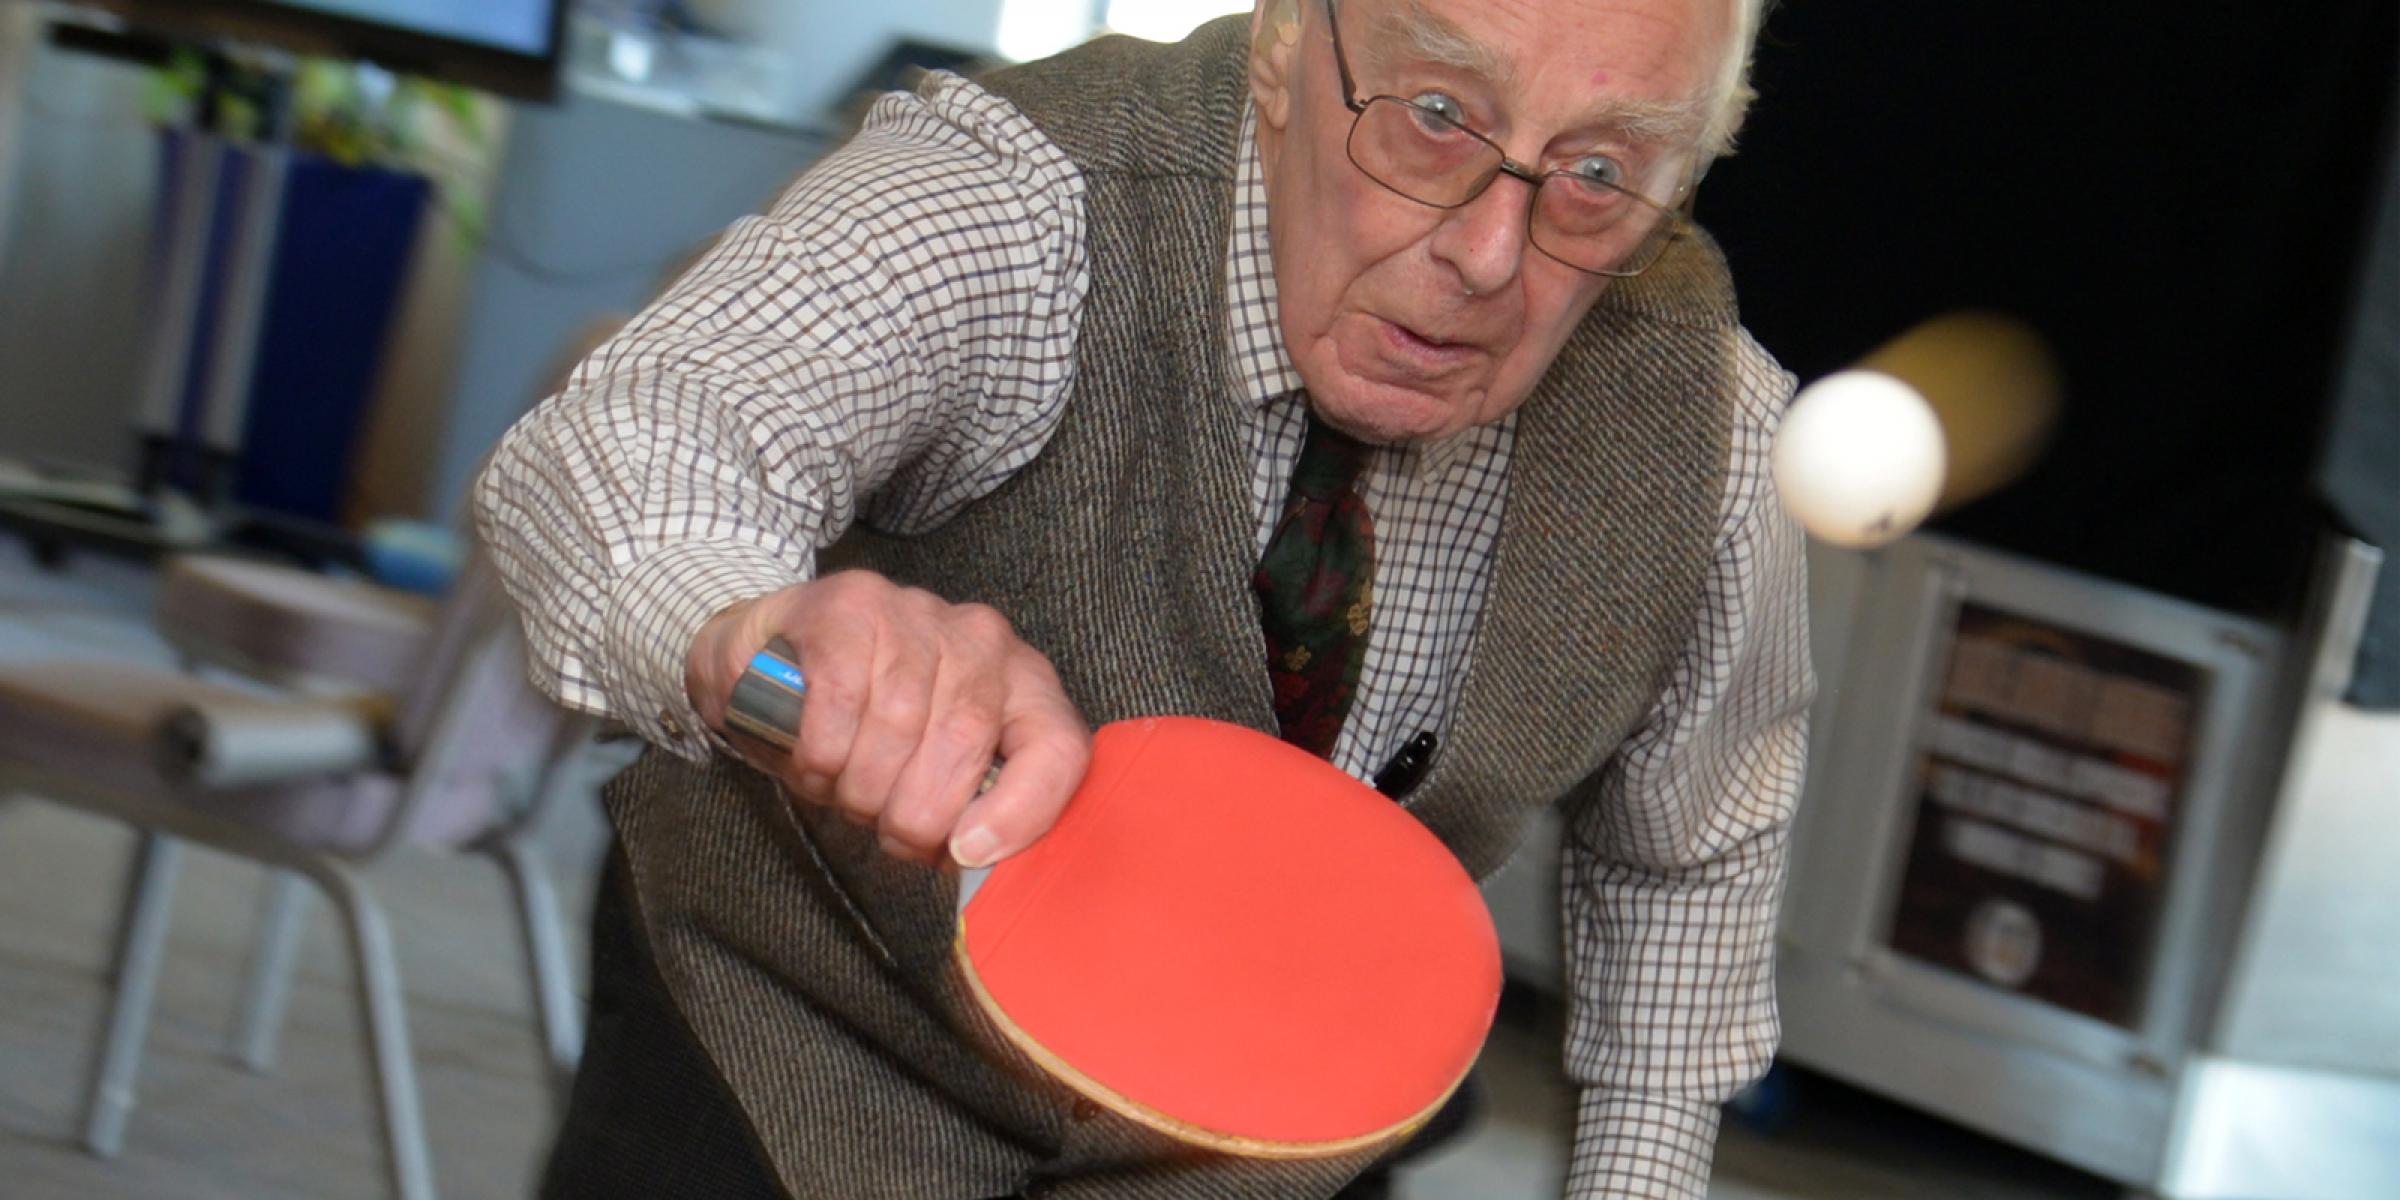 A man playing table tennis at the sports cafe